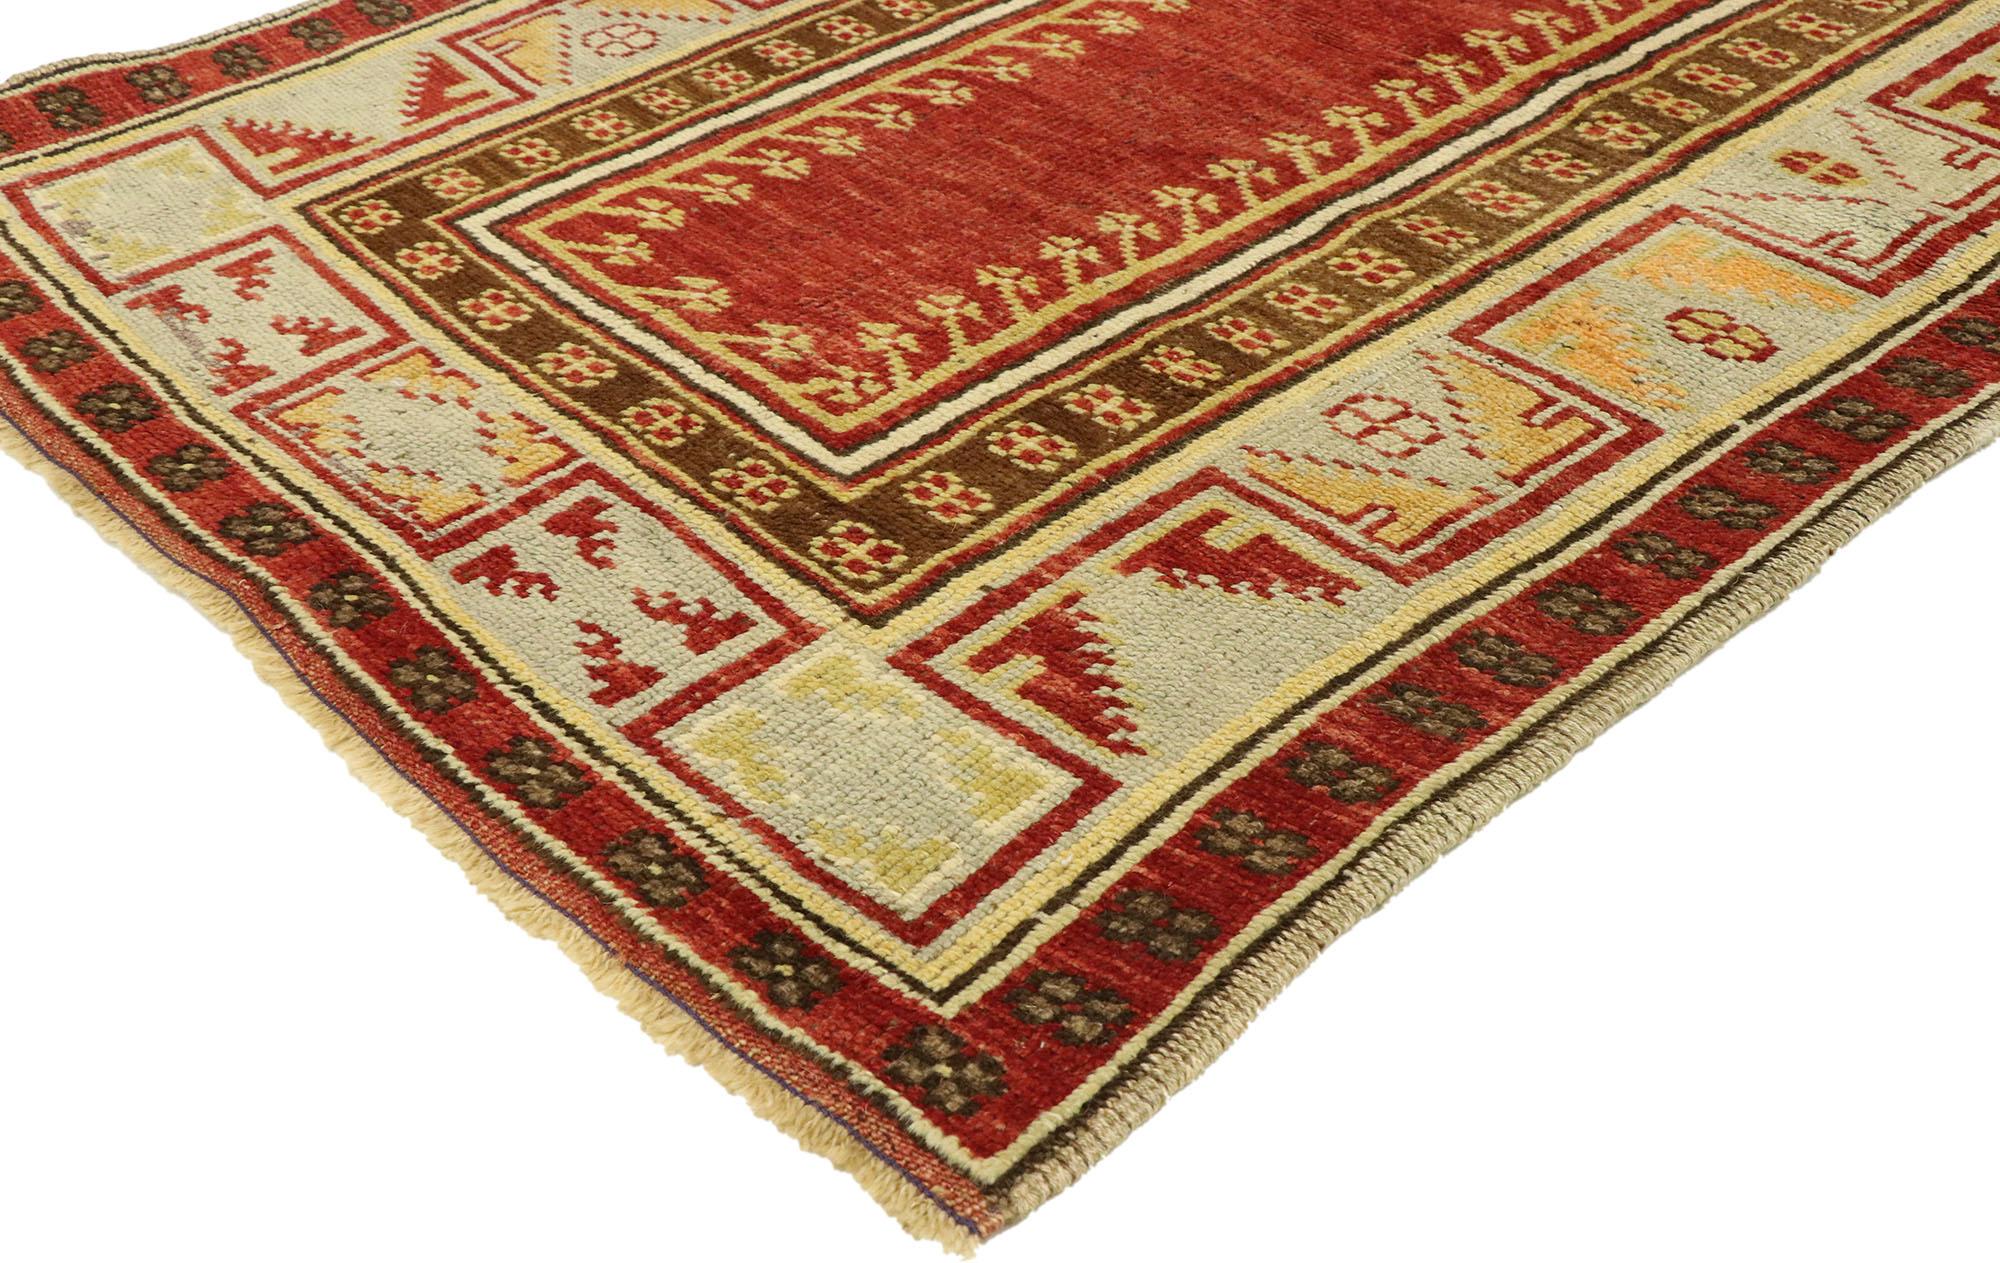 51316, vintage Turkish Oushak Prayer rug. Immersed in Anatolian history and refined colors, this hand knotted wool vintage Turkish Oushak prayer rug combines simplicity with sophistication. It features a stepped mihrab with an open abrashed red